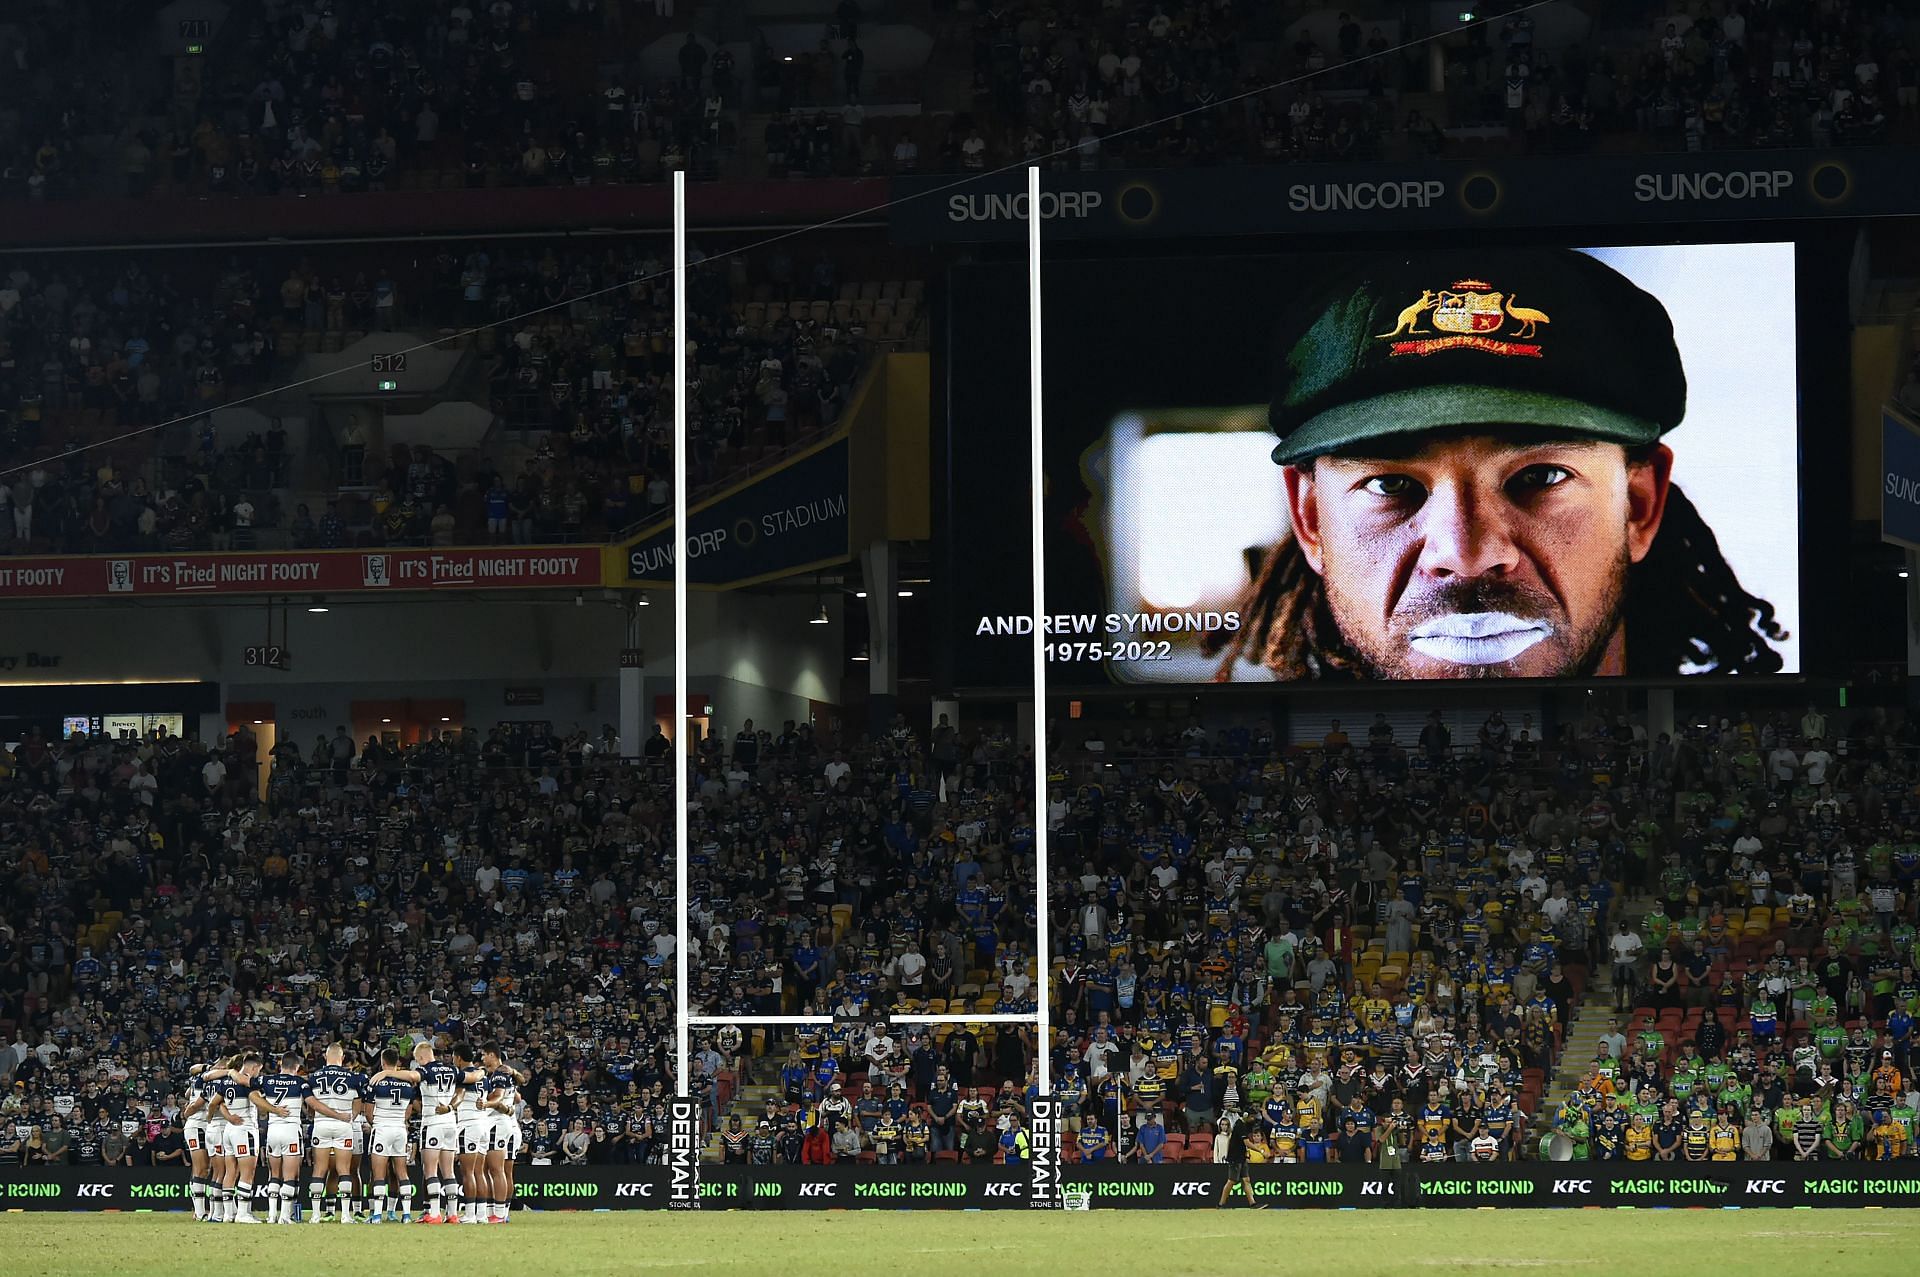 Players and spectators observe a minute of silence in honour of Andrew Symonds before a National Rugby League match in Australia